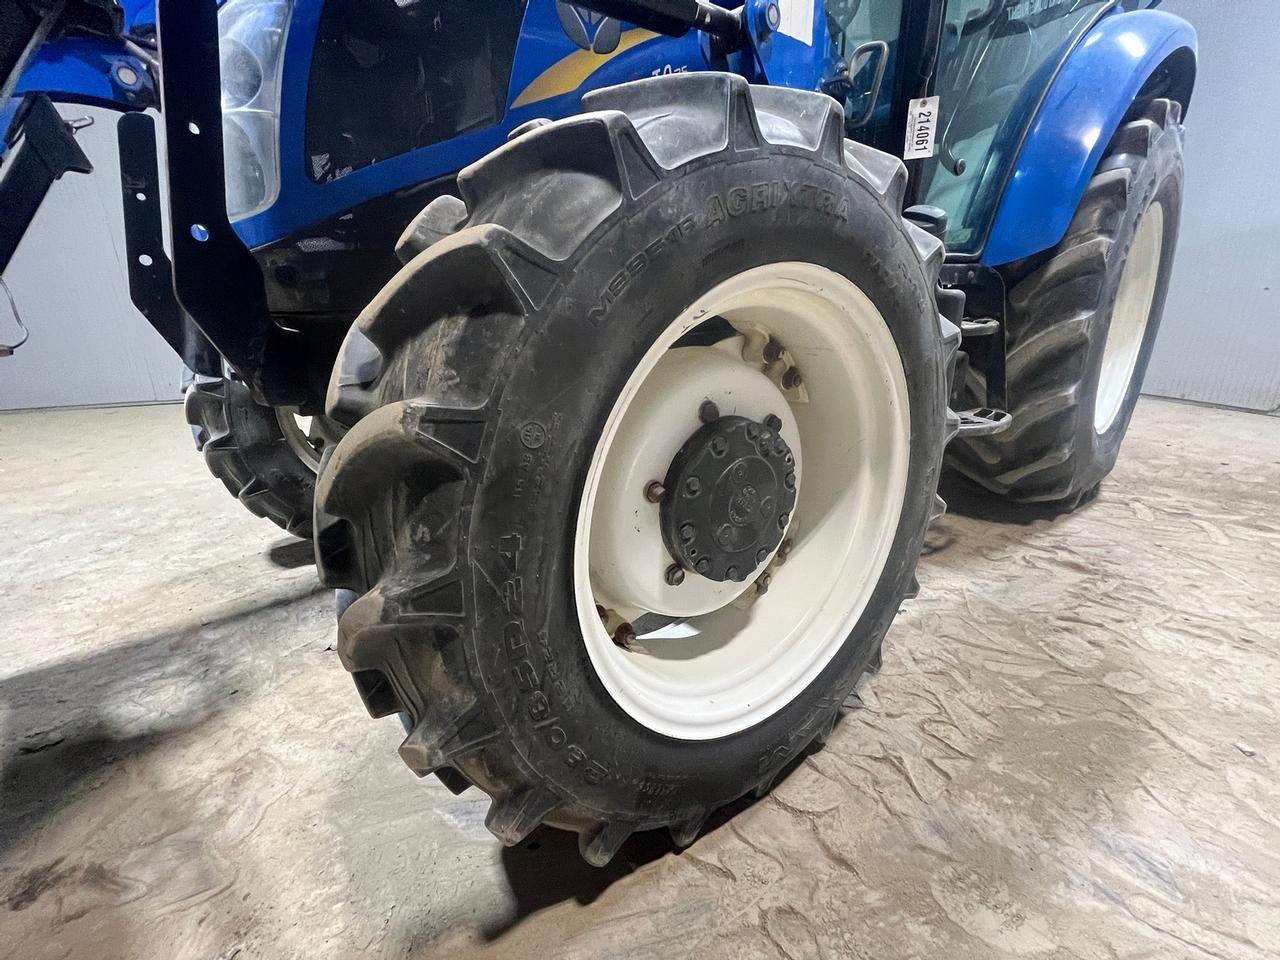 2011 New Holland T4.75 Tractor with Loader